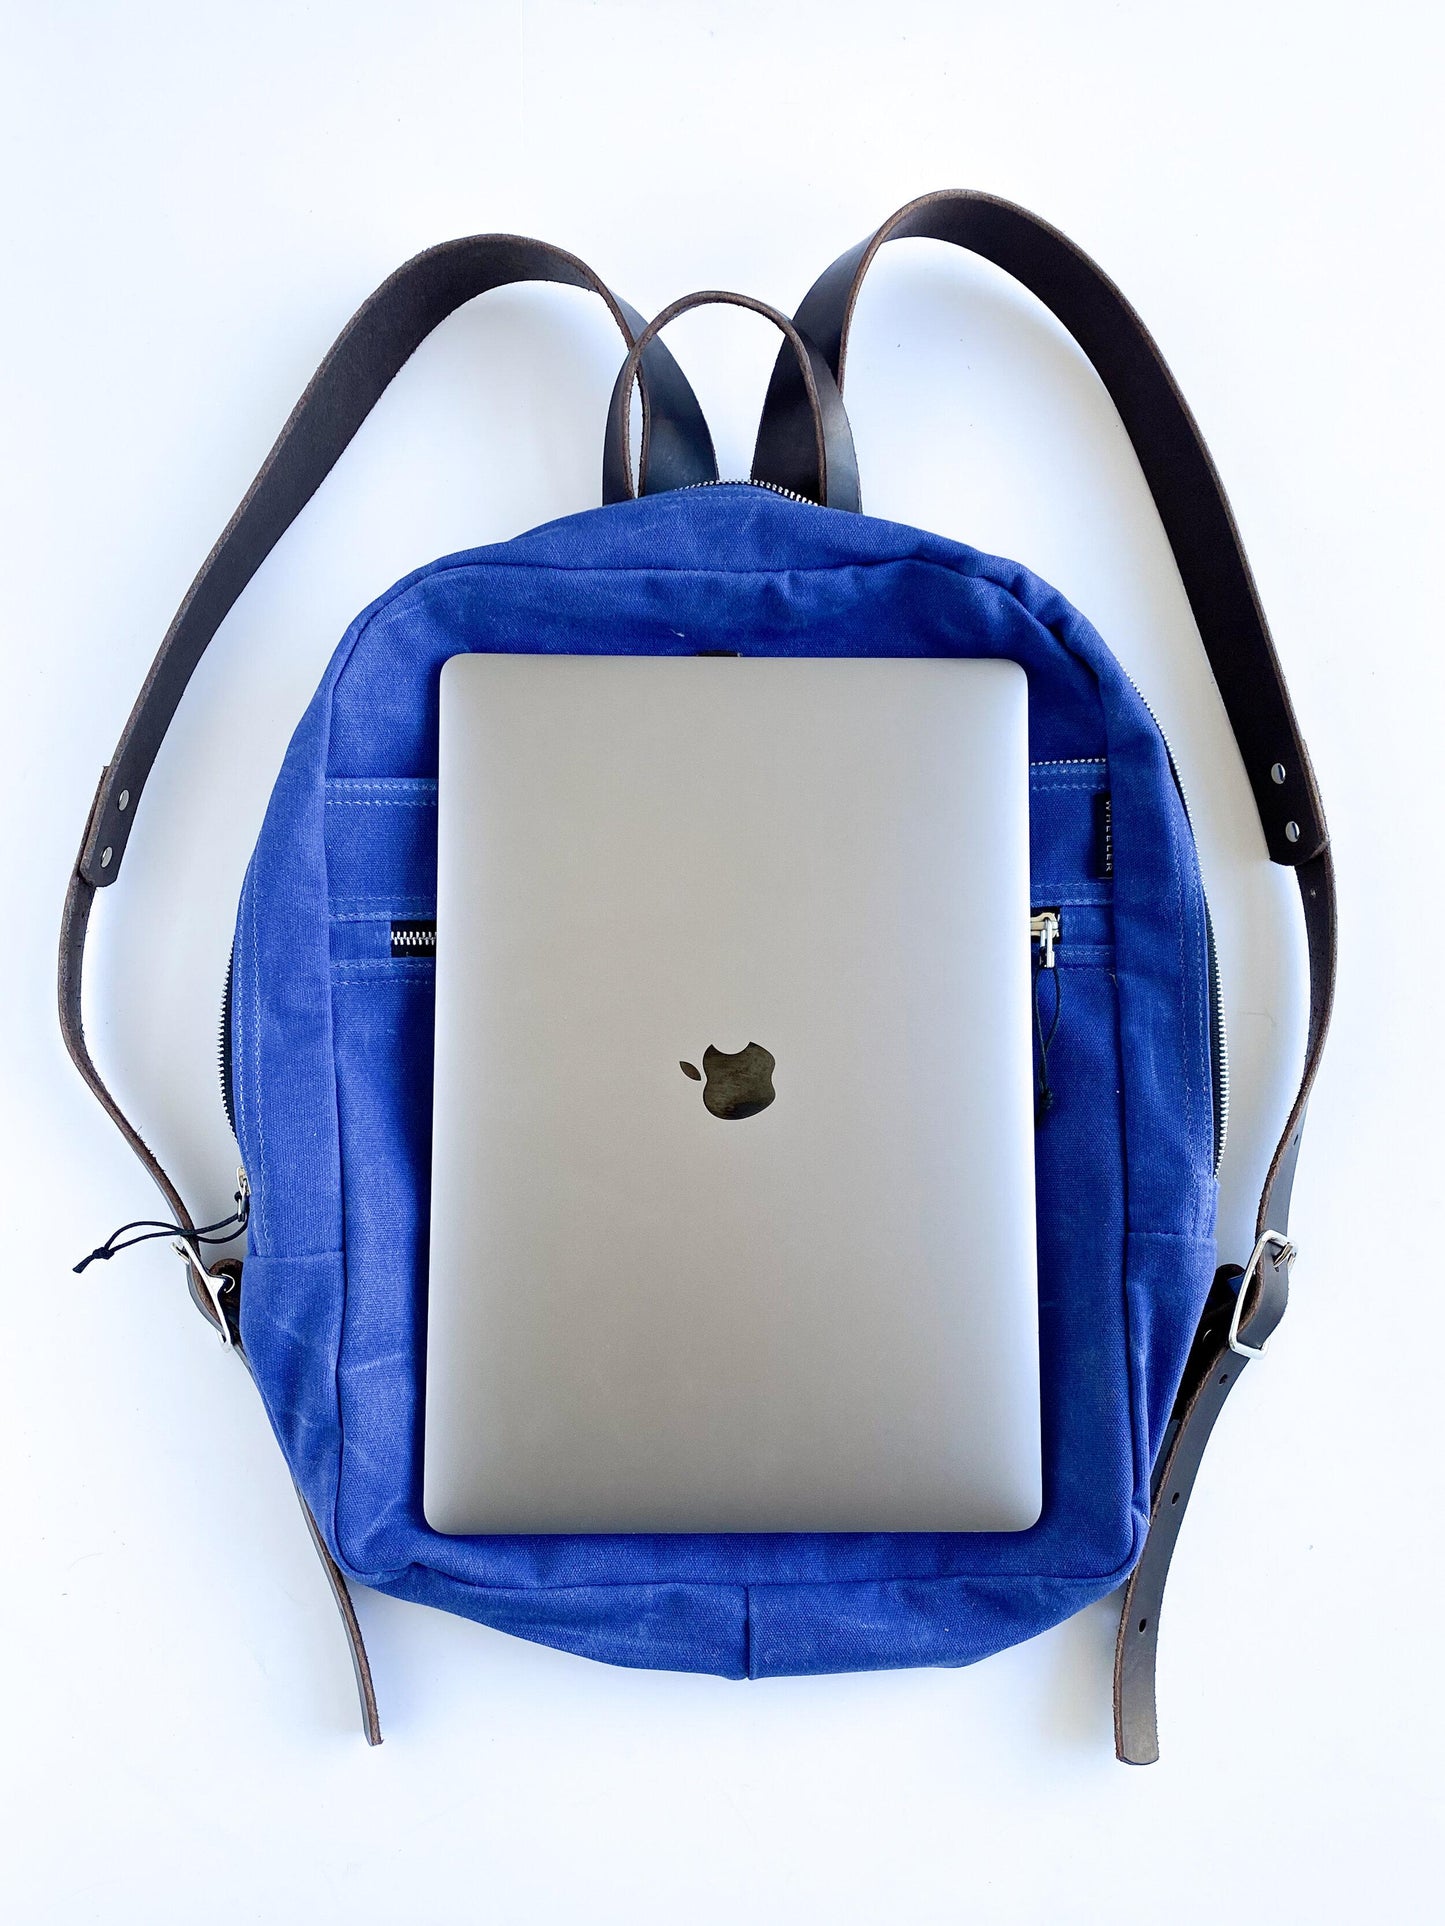 Waxed cotton canvas backpack with laptop, size example.